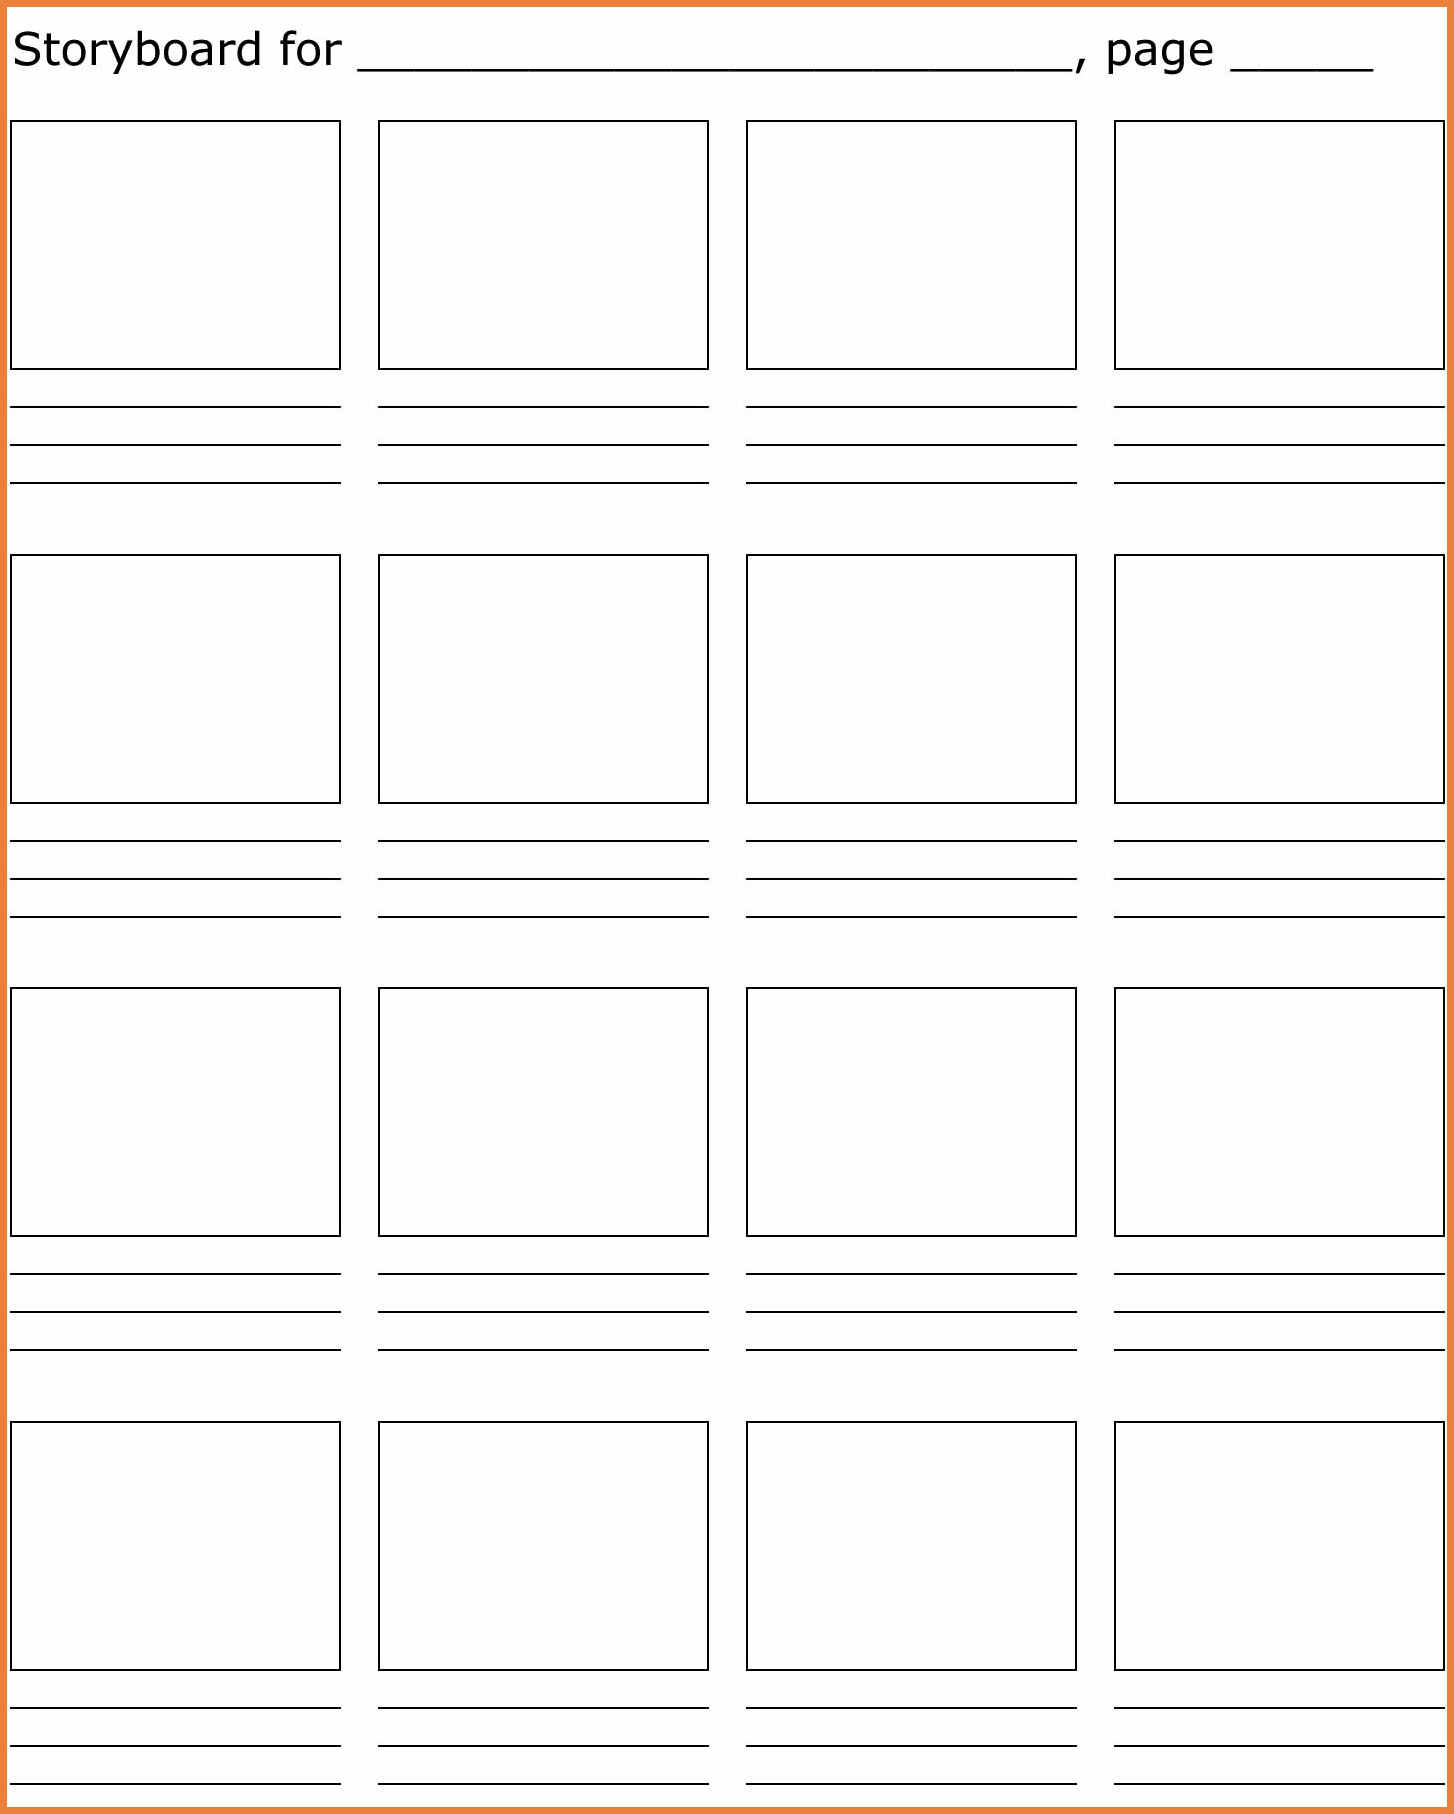 Storyboard Template with Descriptions Storyboard